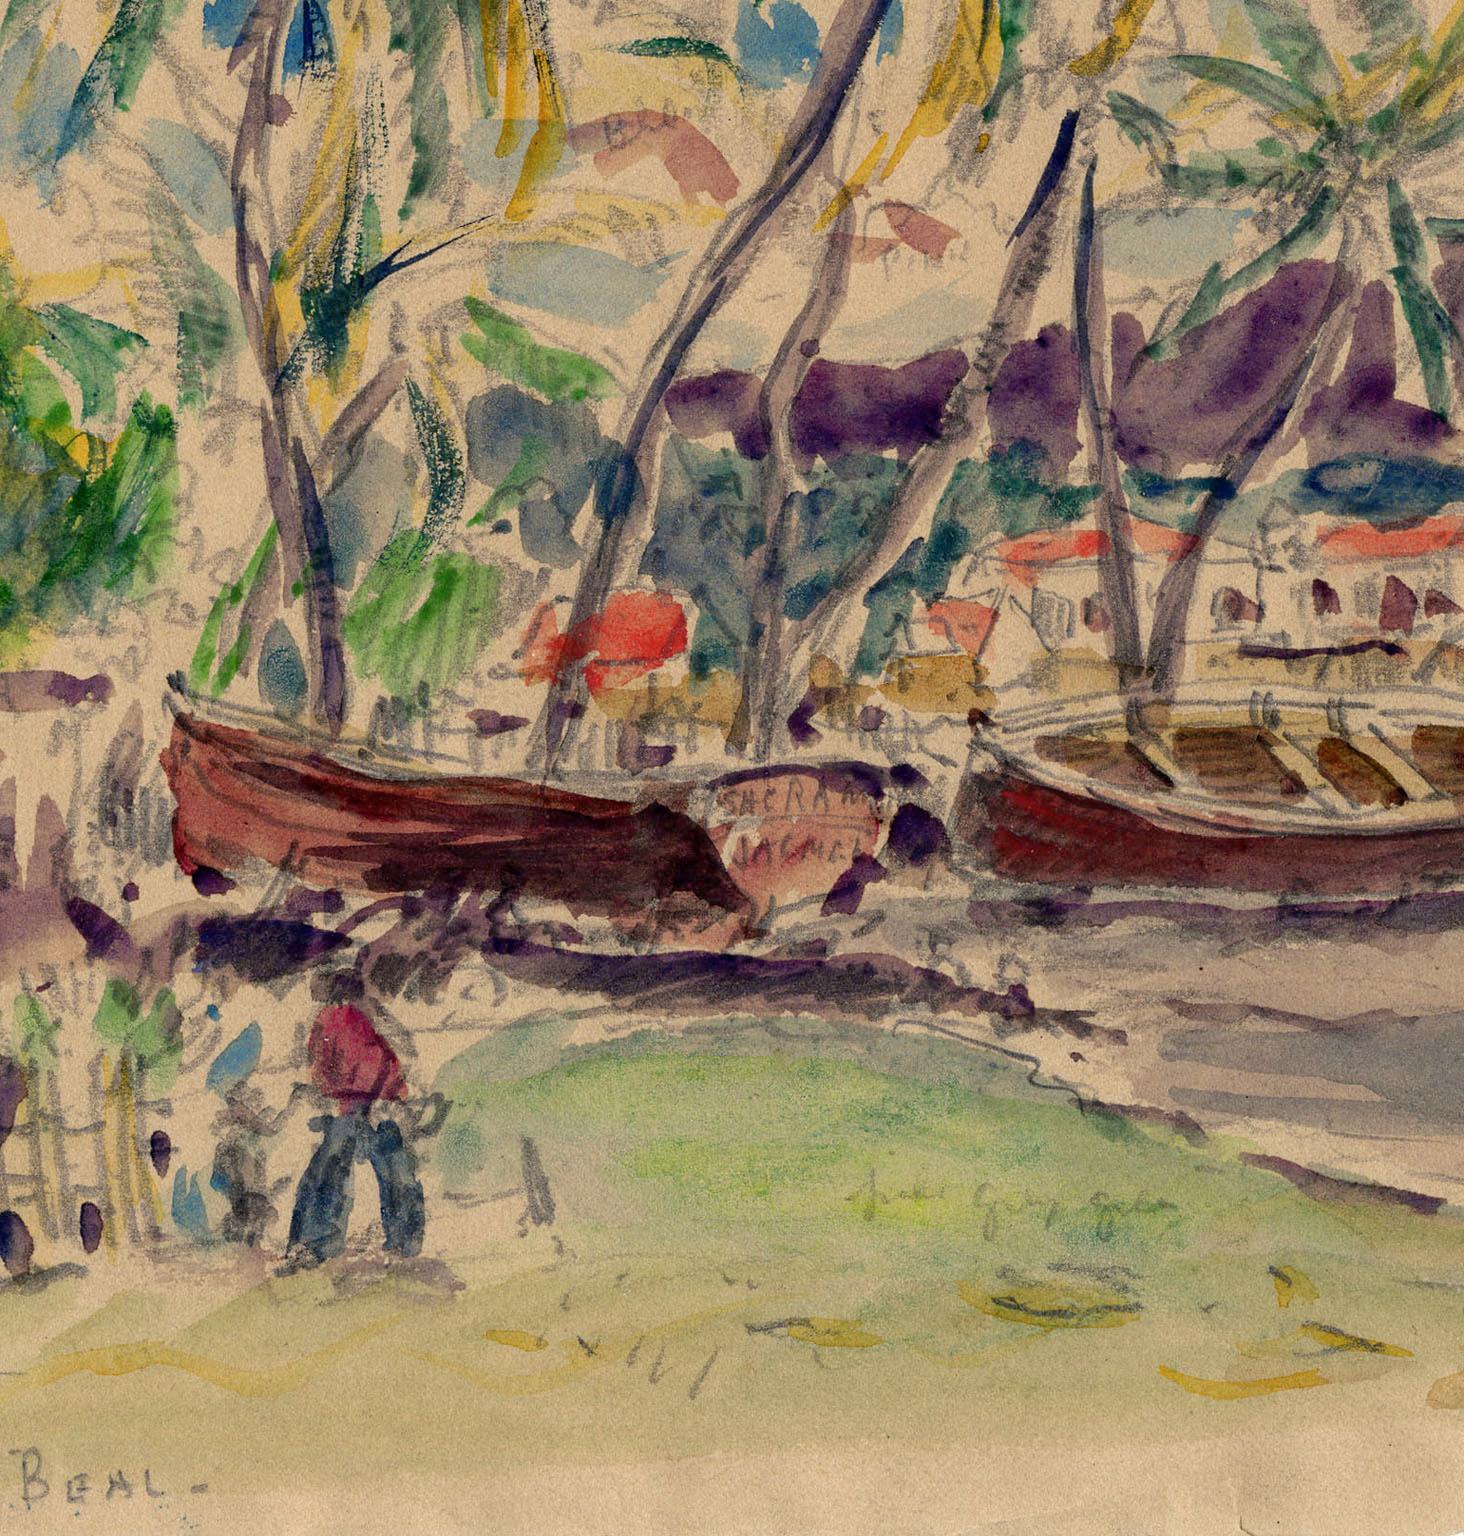 “JACMEL, HAITI, Mar. 13, 1923” is a watercolor and pencil drawing on paper from circa 1923.  The paper size 8 3/4 x 11 1/16